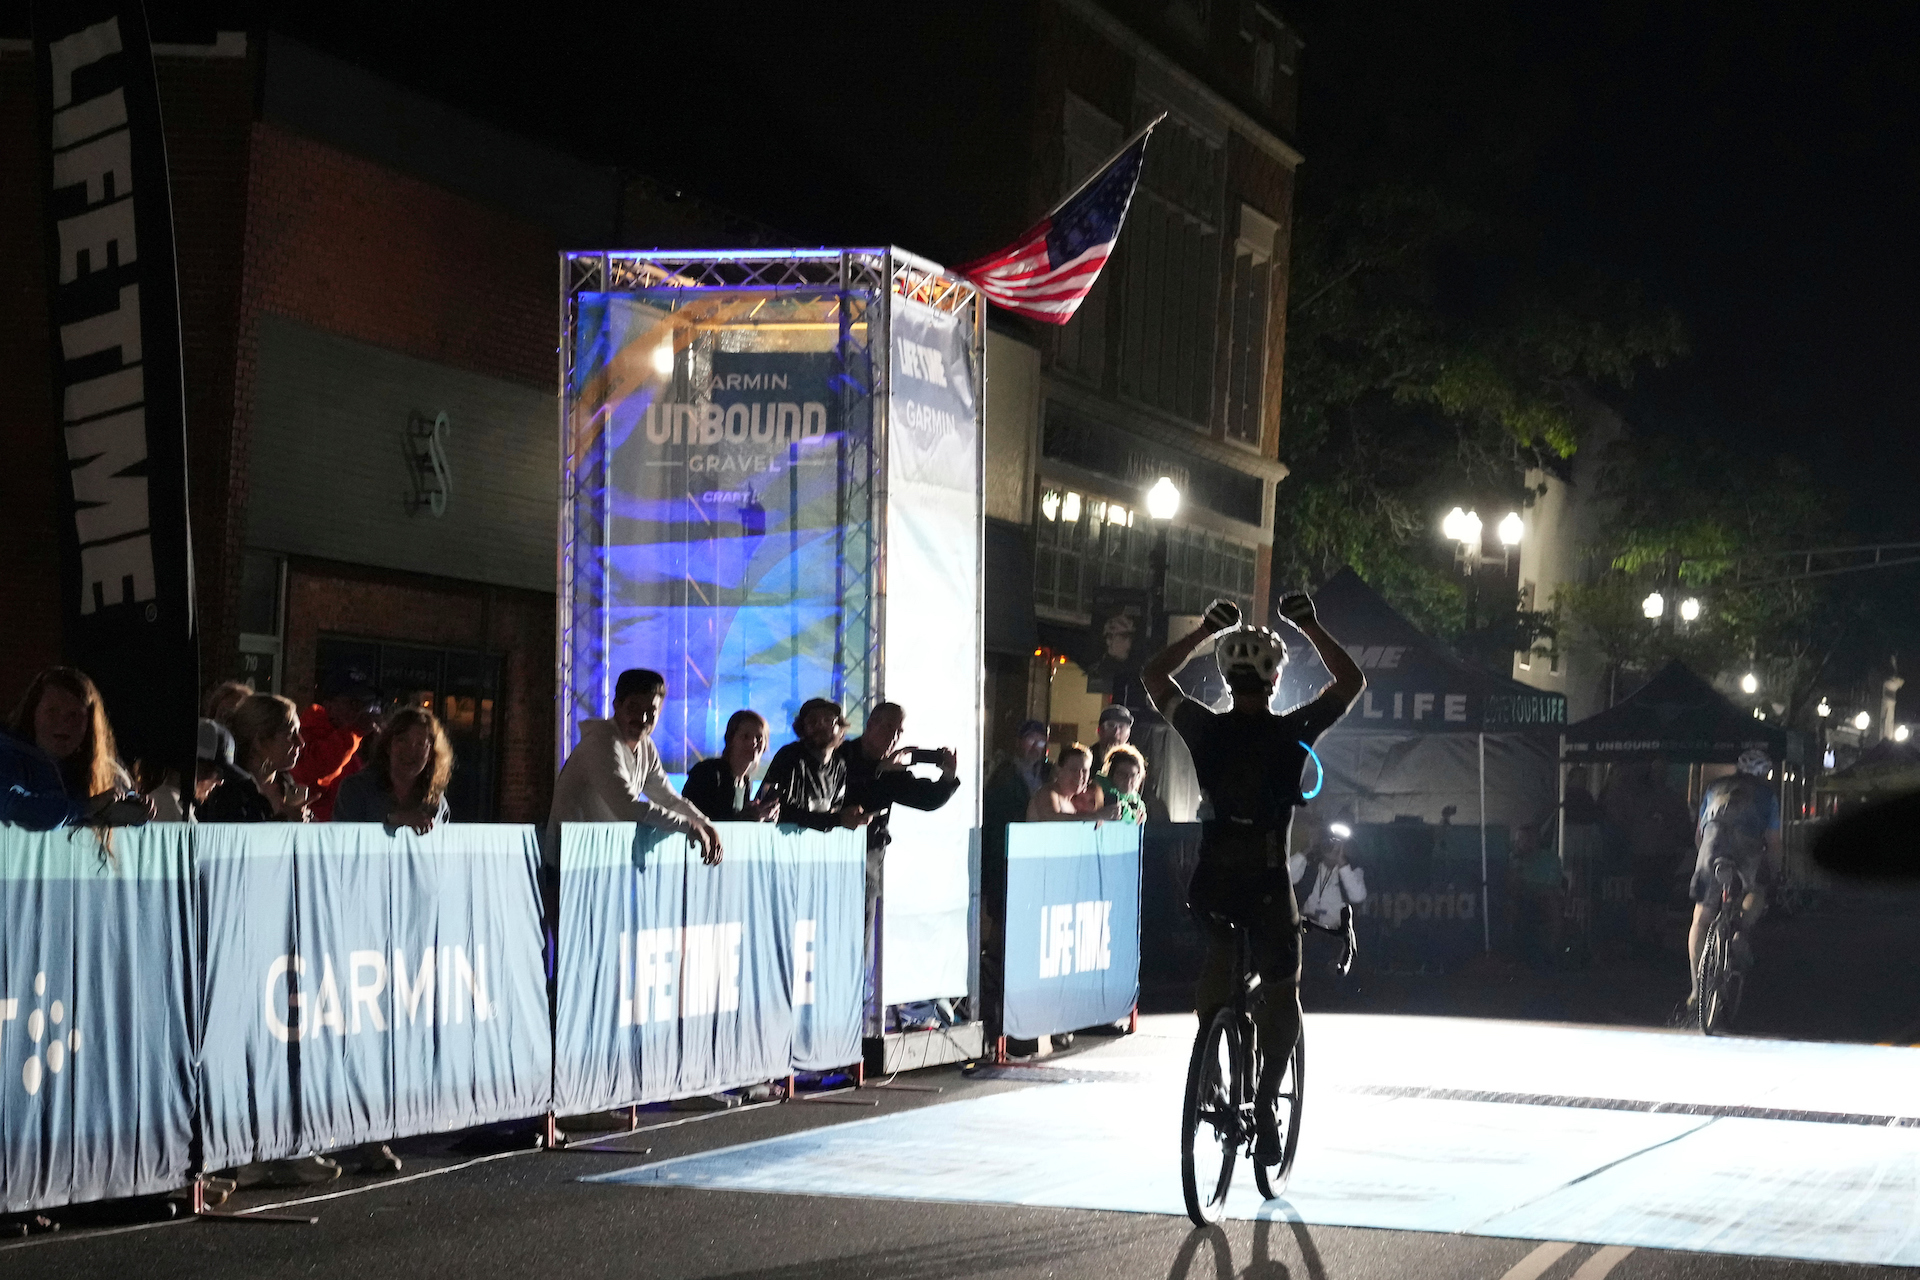 A lone finisher crosses the line at Unbound Gravel. It's dark, with the only light from floodlights on the line, and he's just behind another rider, and he is sitting up, raising his hands in a victory salute at having finished. A few people lean over the barriers to cheer.